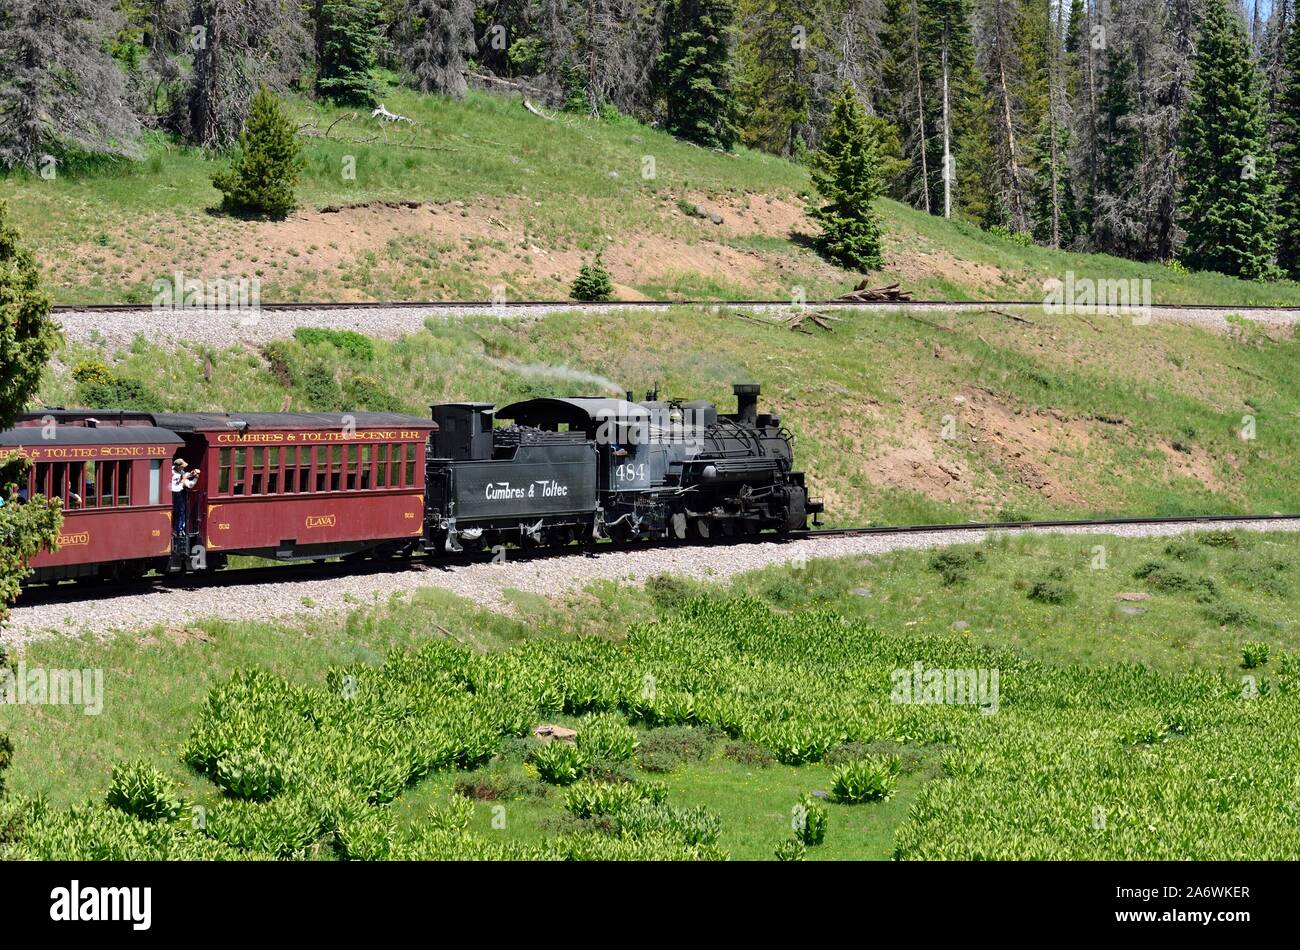 Tanglefoot Curve, Mile Posts 330-329, Cumbres Pass to Los Pinos Tank, On the Cumbres & Toltec Scenic Railroad from Chama, NM to Antonito, CO 190712 75 Stock Photo